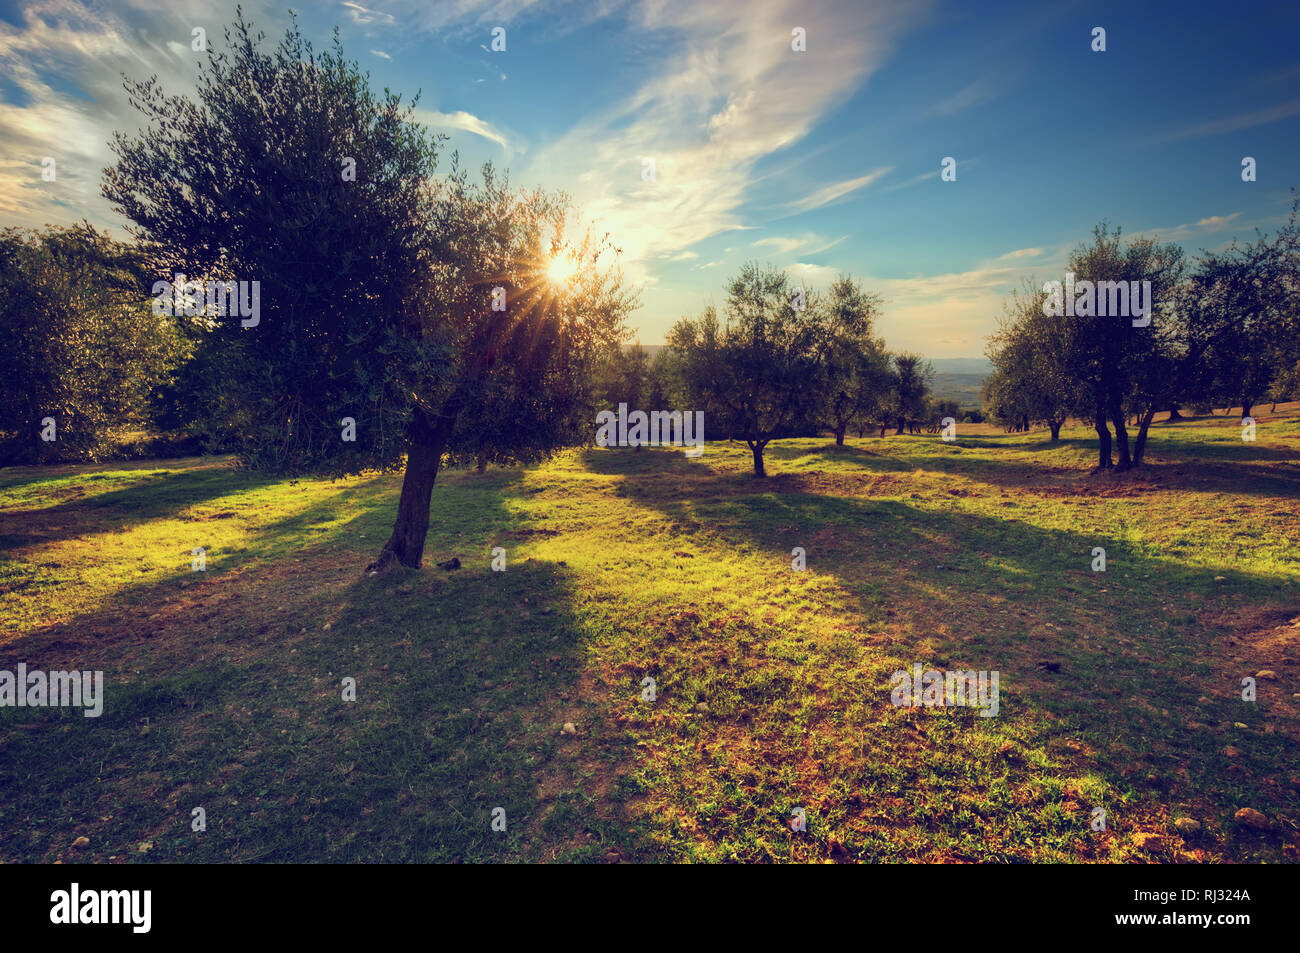 Olive trees in Tuscany, Italy at sunset. Sun shining through leaves. Vintage Stock Photo